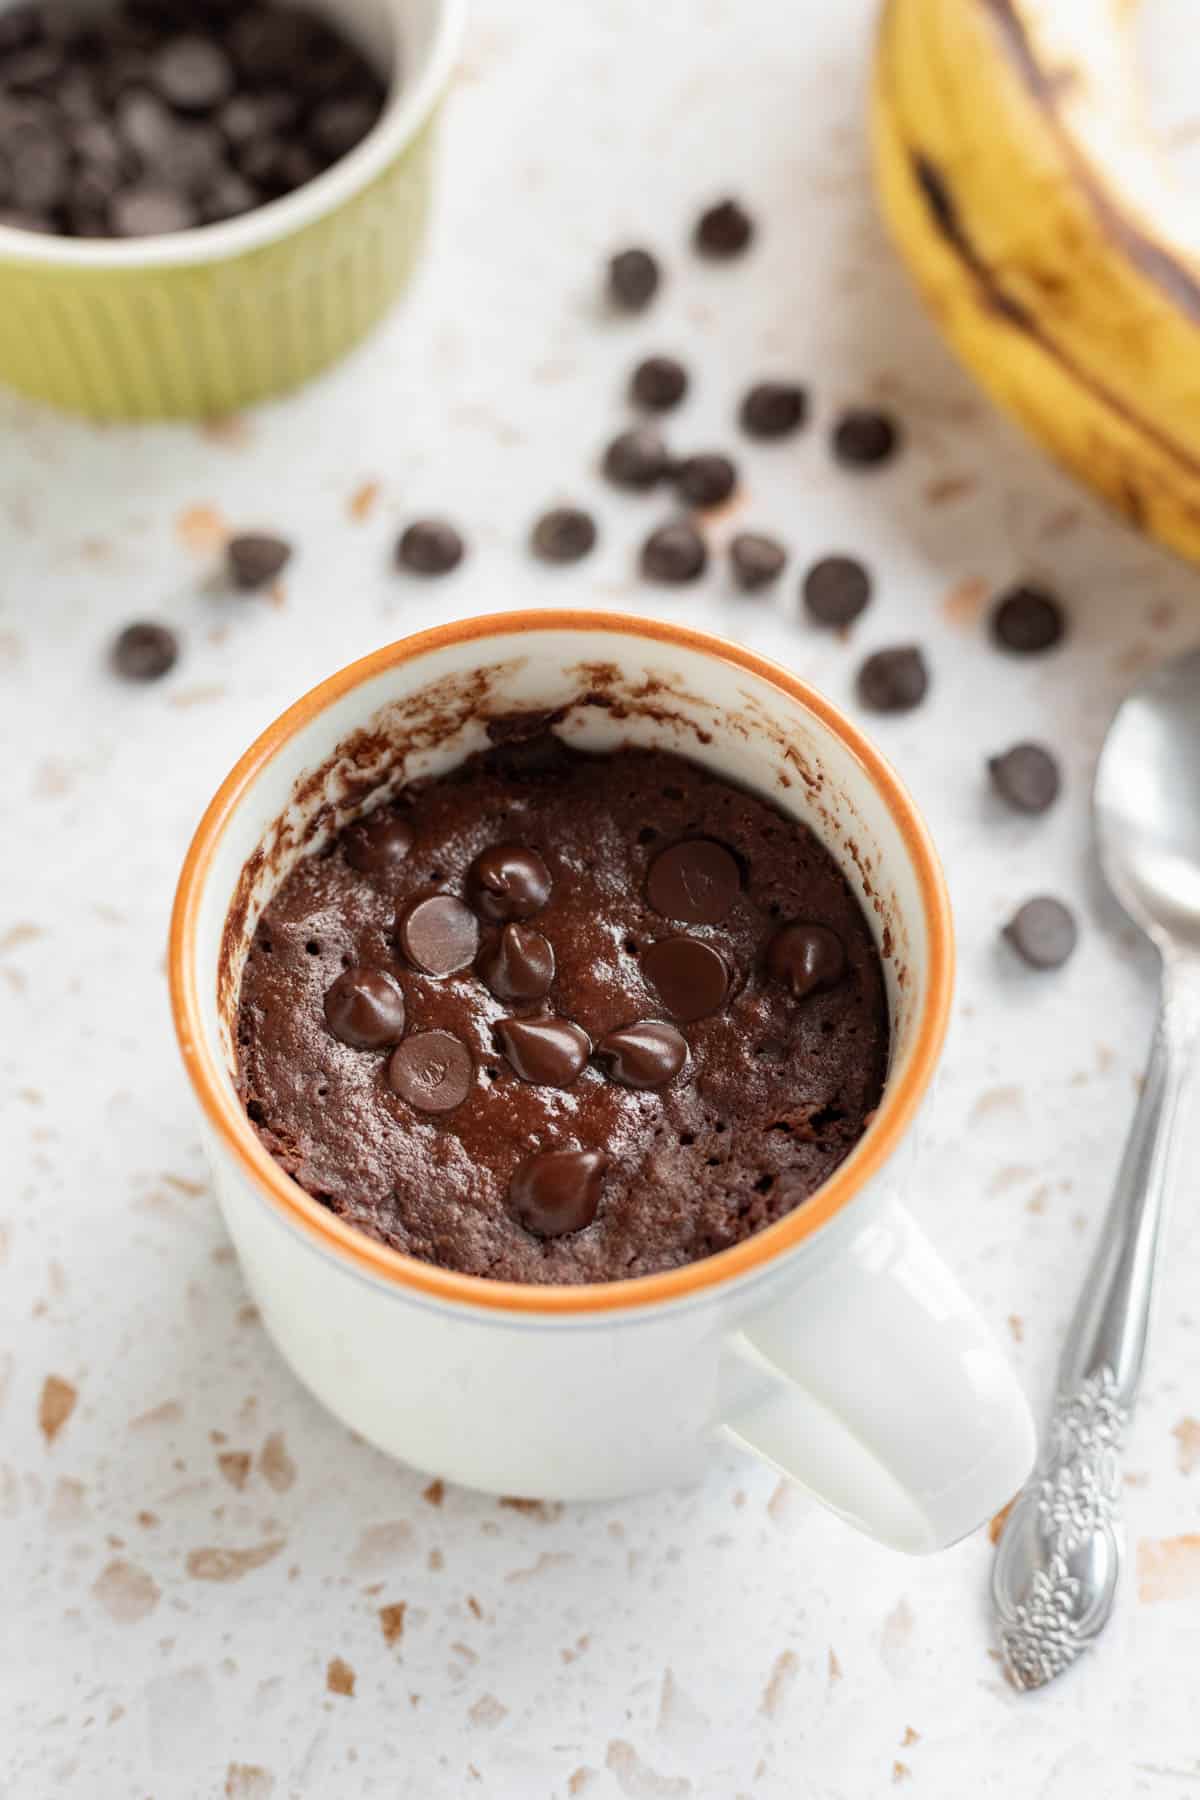 A microwaved brownie with chocolate chips on top in a small white mug.